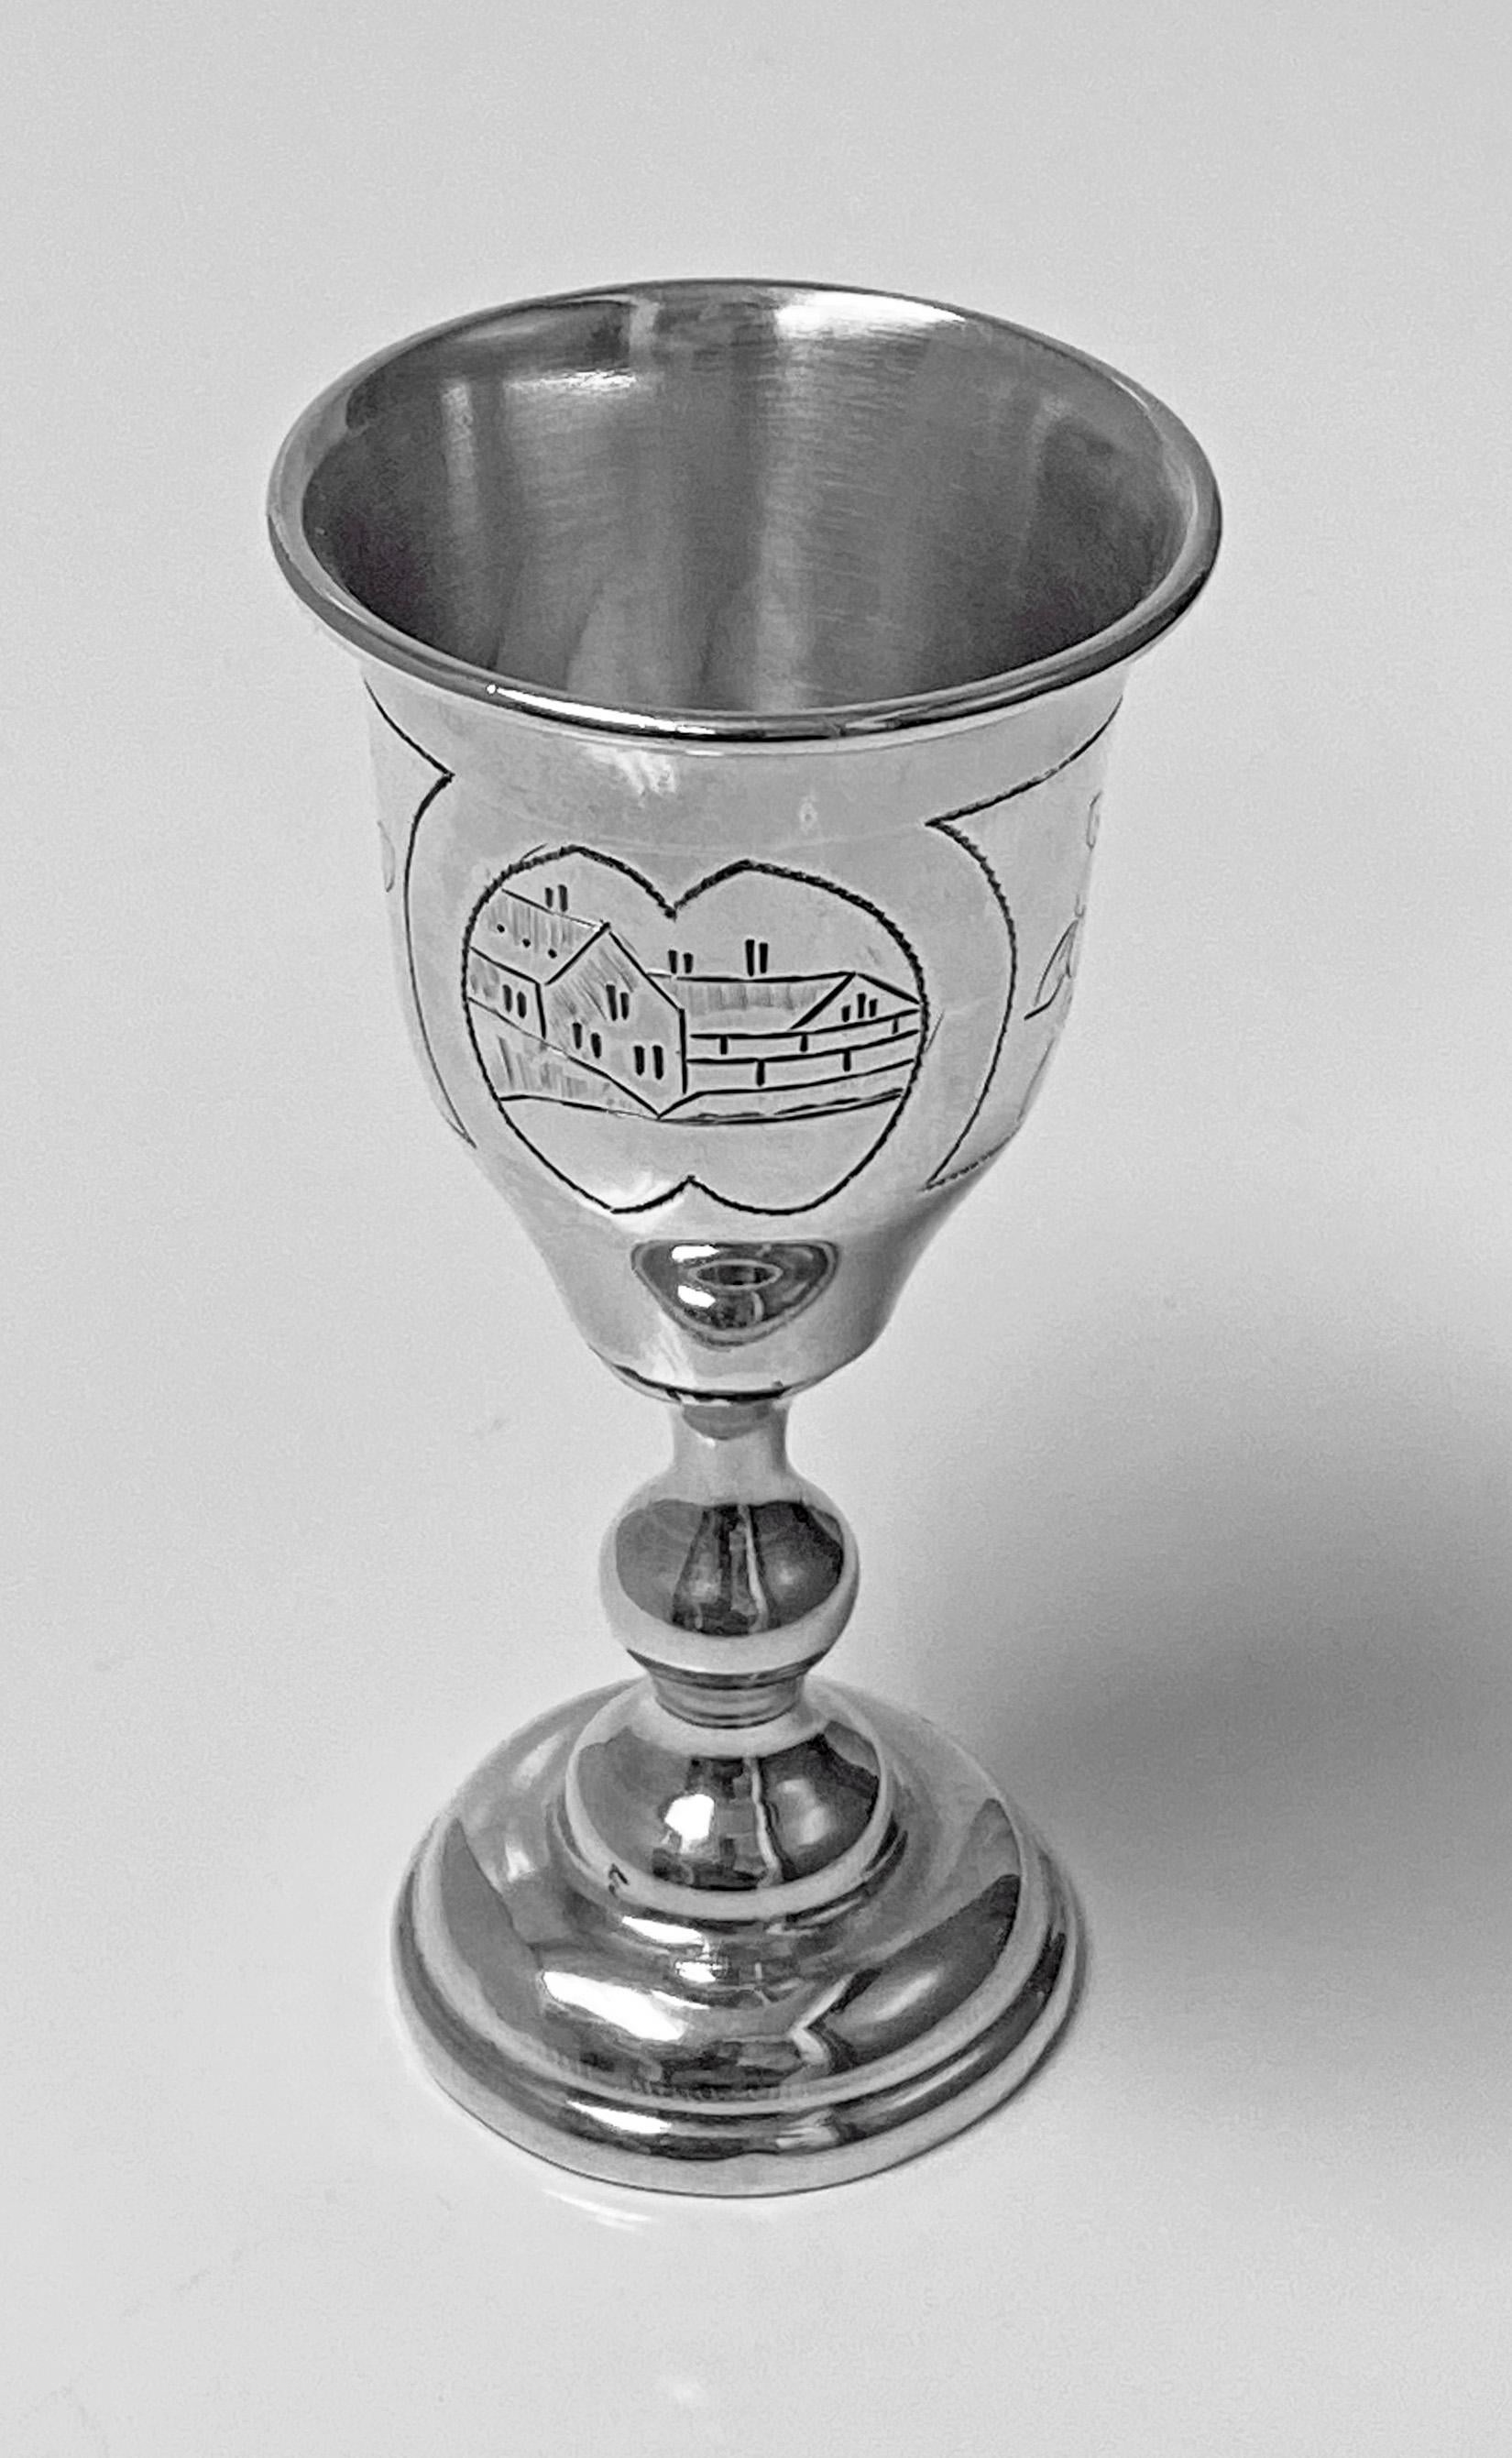 Antique Russian silver kiddush cup becher Moscow 1876. The cup on pedestal base, knopped stem, vase shaped body, engraved scenes surround. Full Moscow marks 84 zlotnick and year 1876 also marked under base. Height: 3.70 inches. Item weight: 46.30